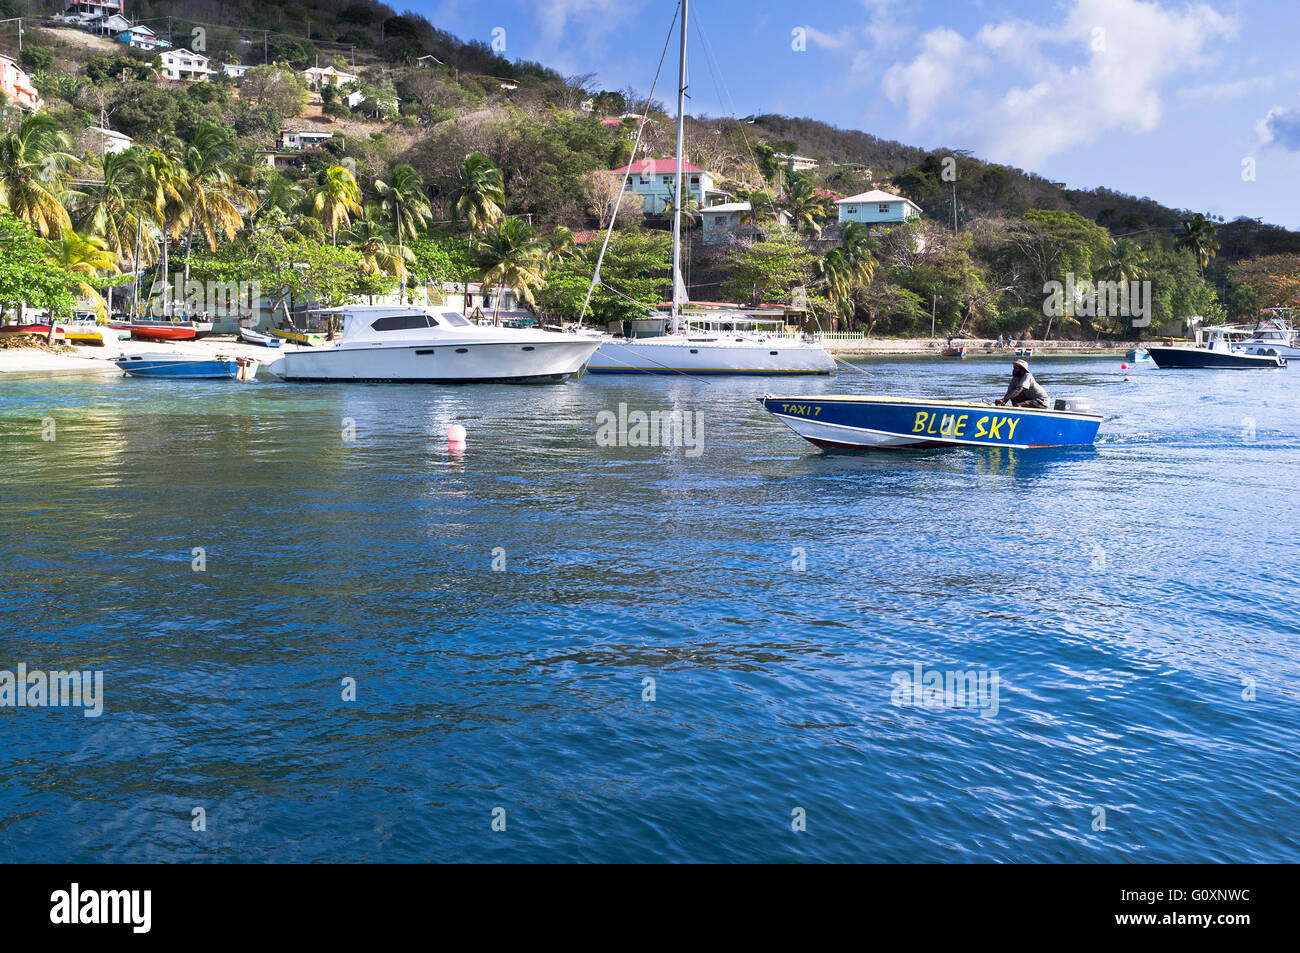 dh Bequia island Admiralty Bay ST VINCENT CARIBBEAN ISLANDS Local grenadine caribbean boat yachts boats bay coast west indies grenadines Stock Photo